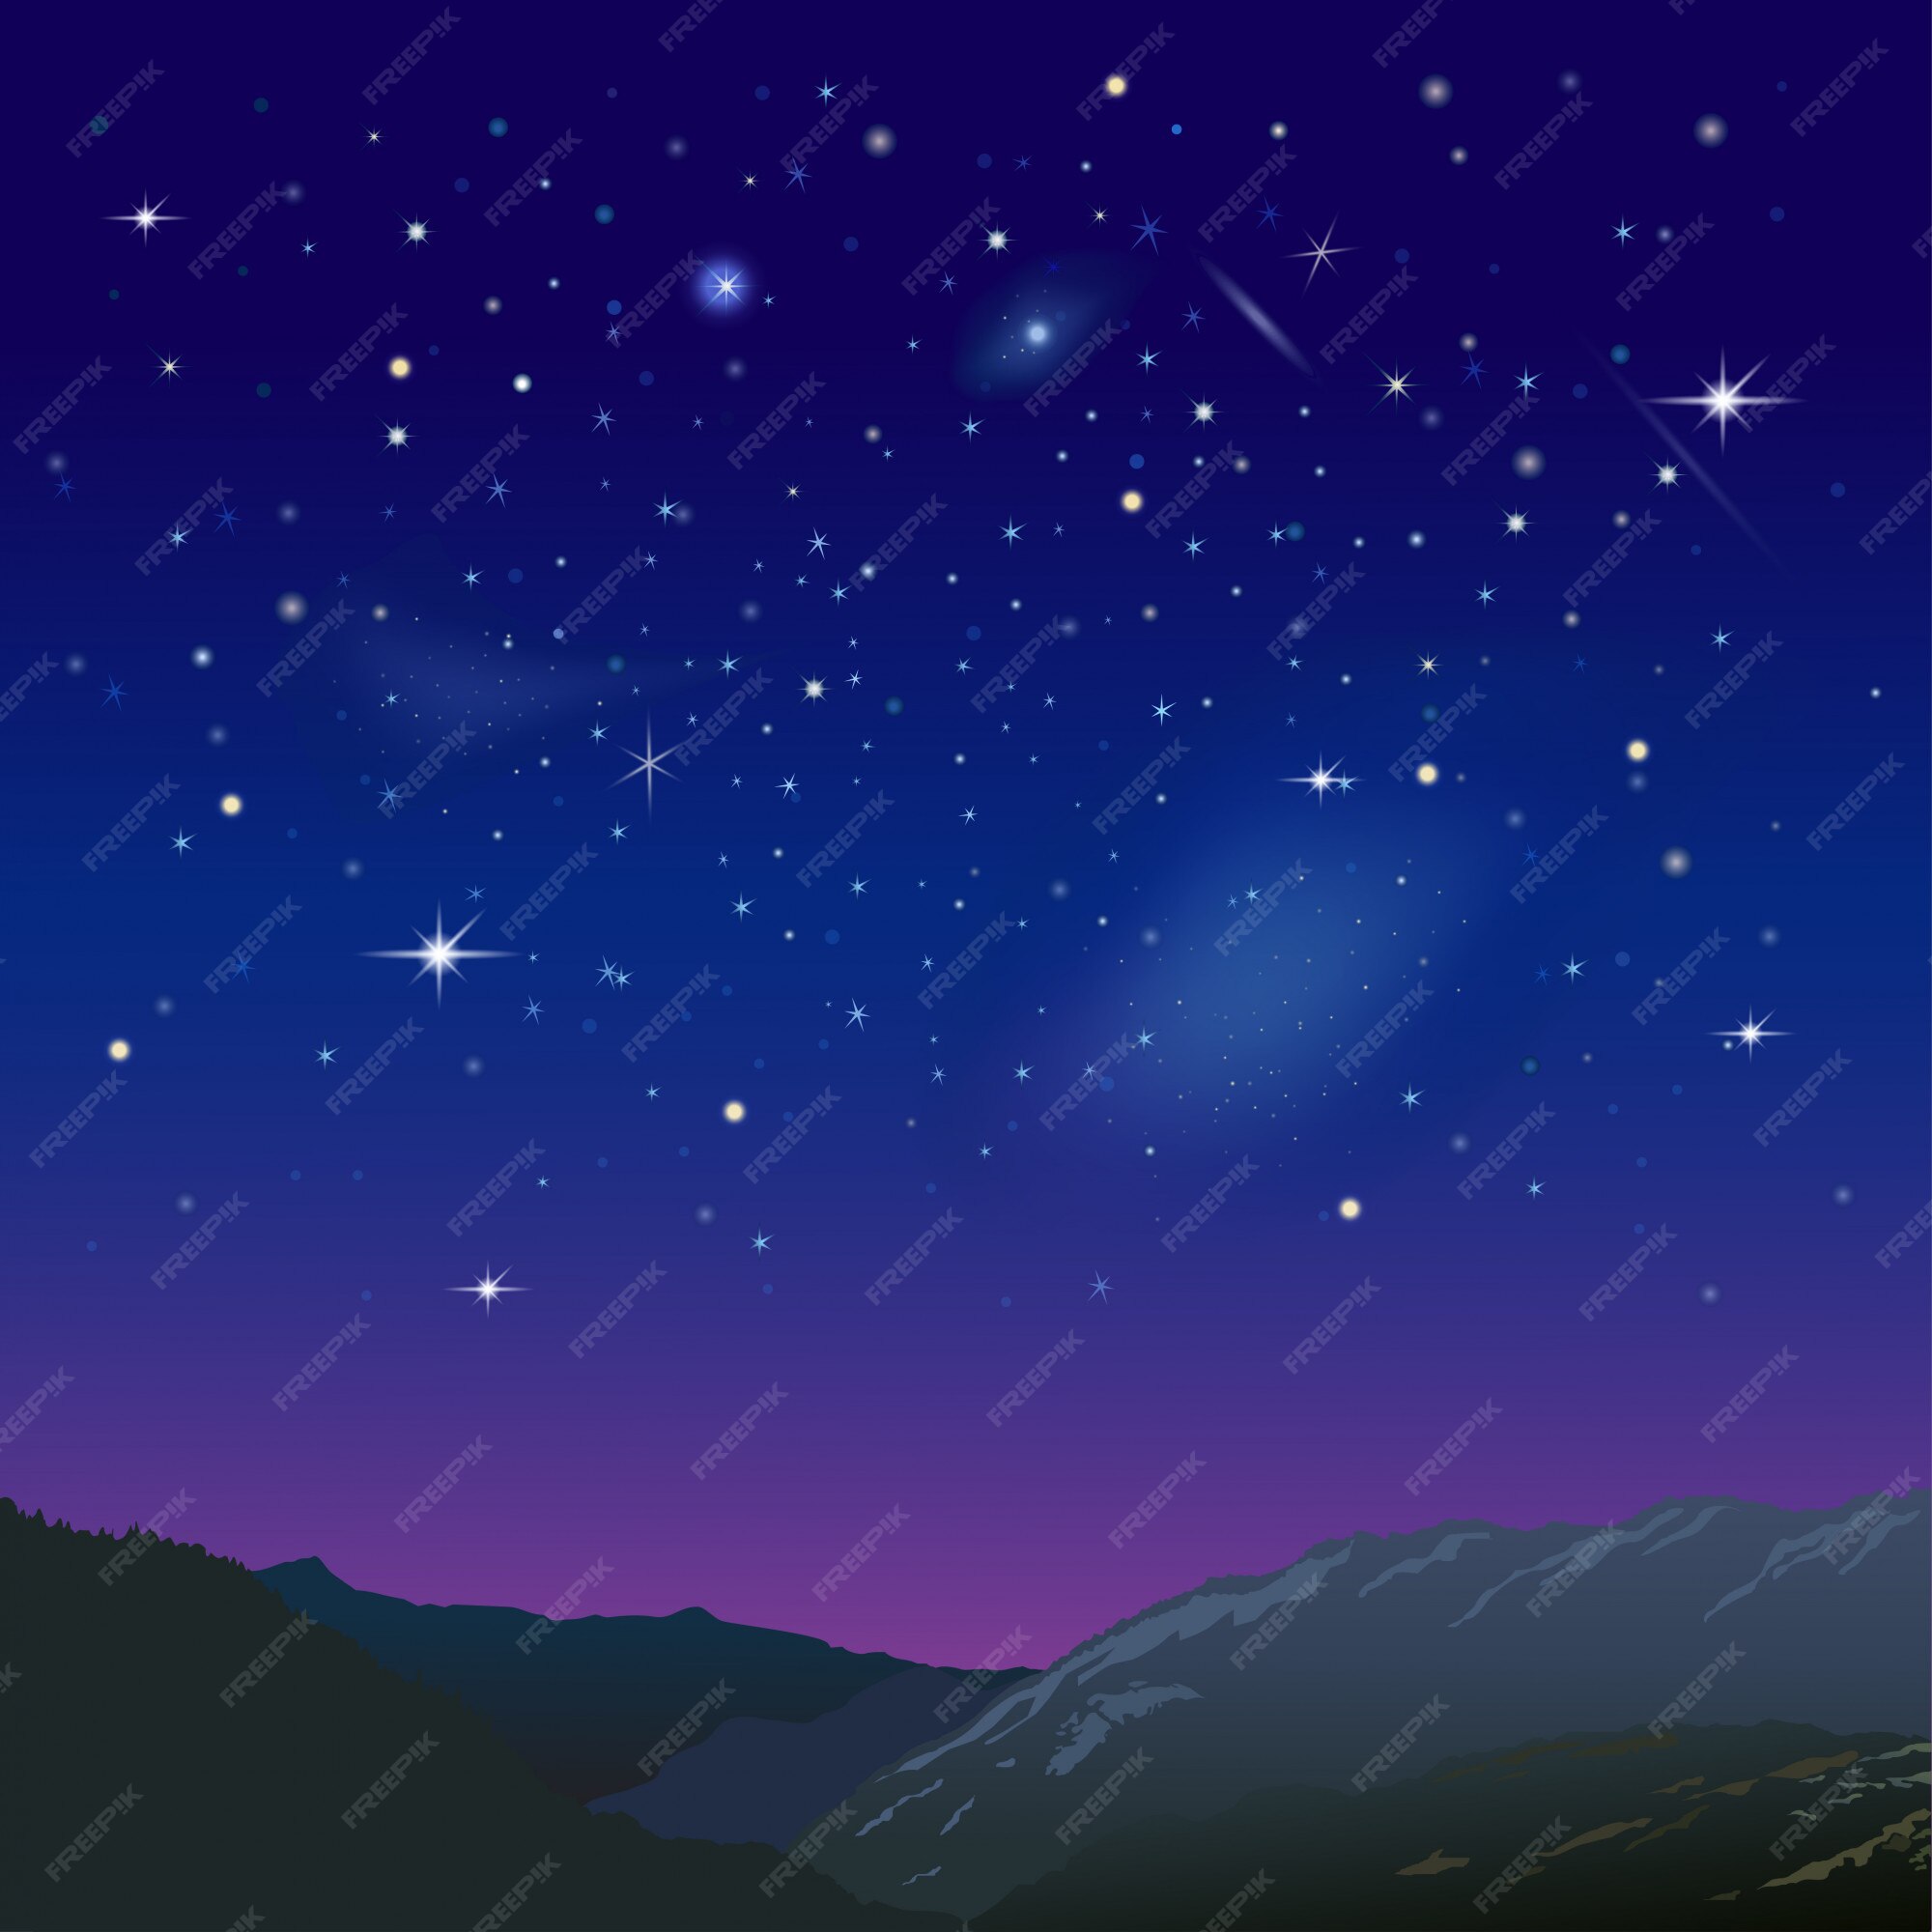 Premium Vector | Night starry sky over the mountains. illustration